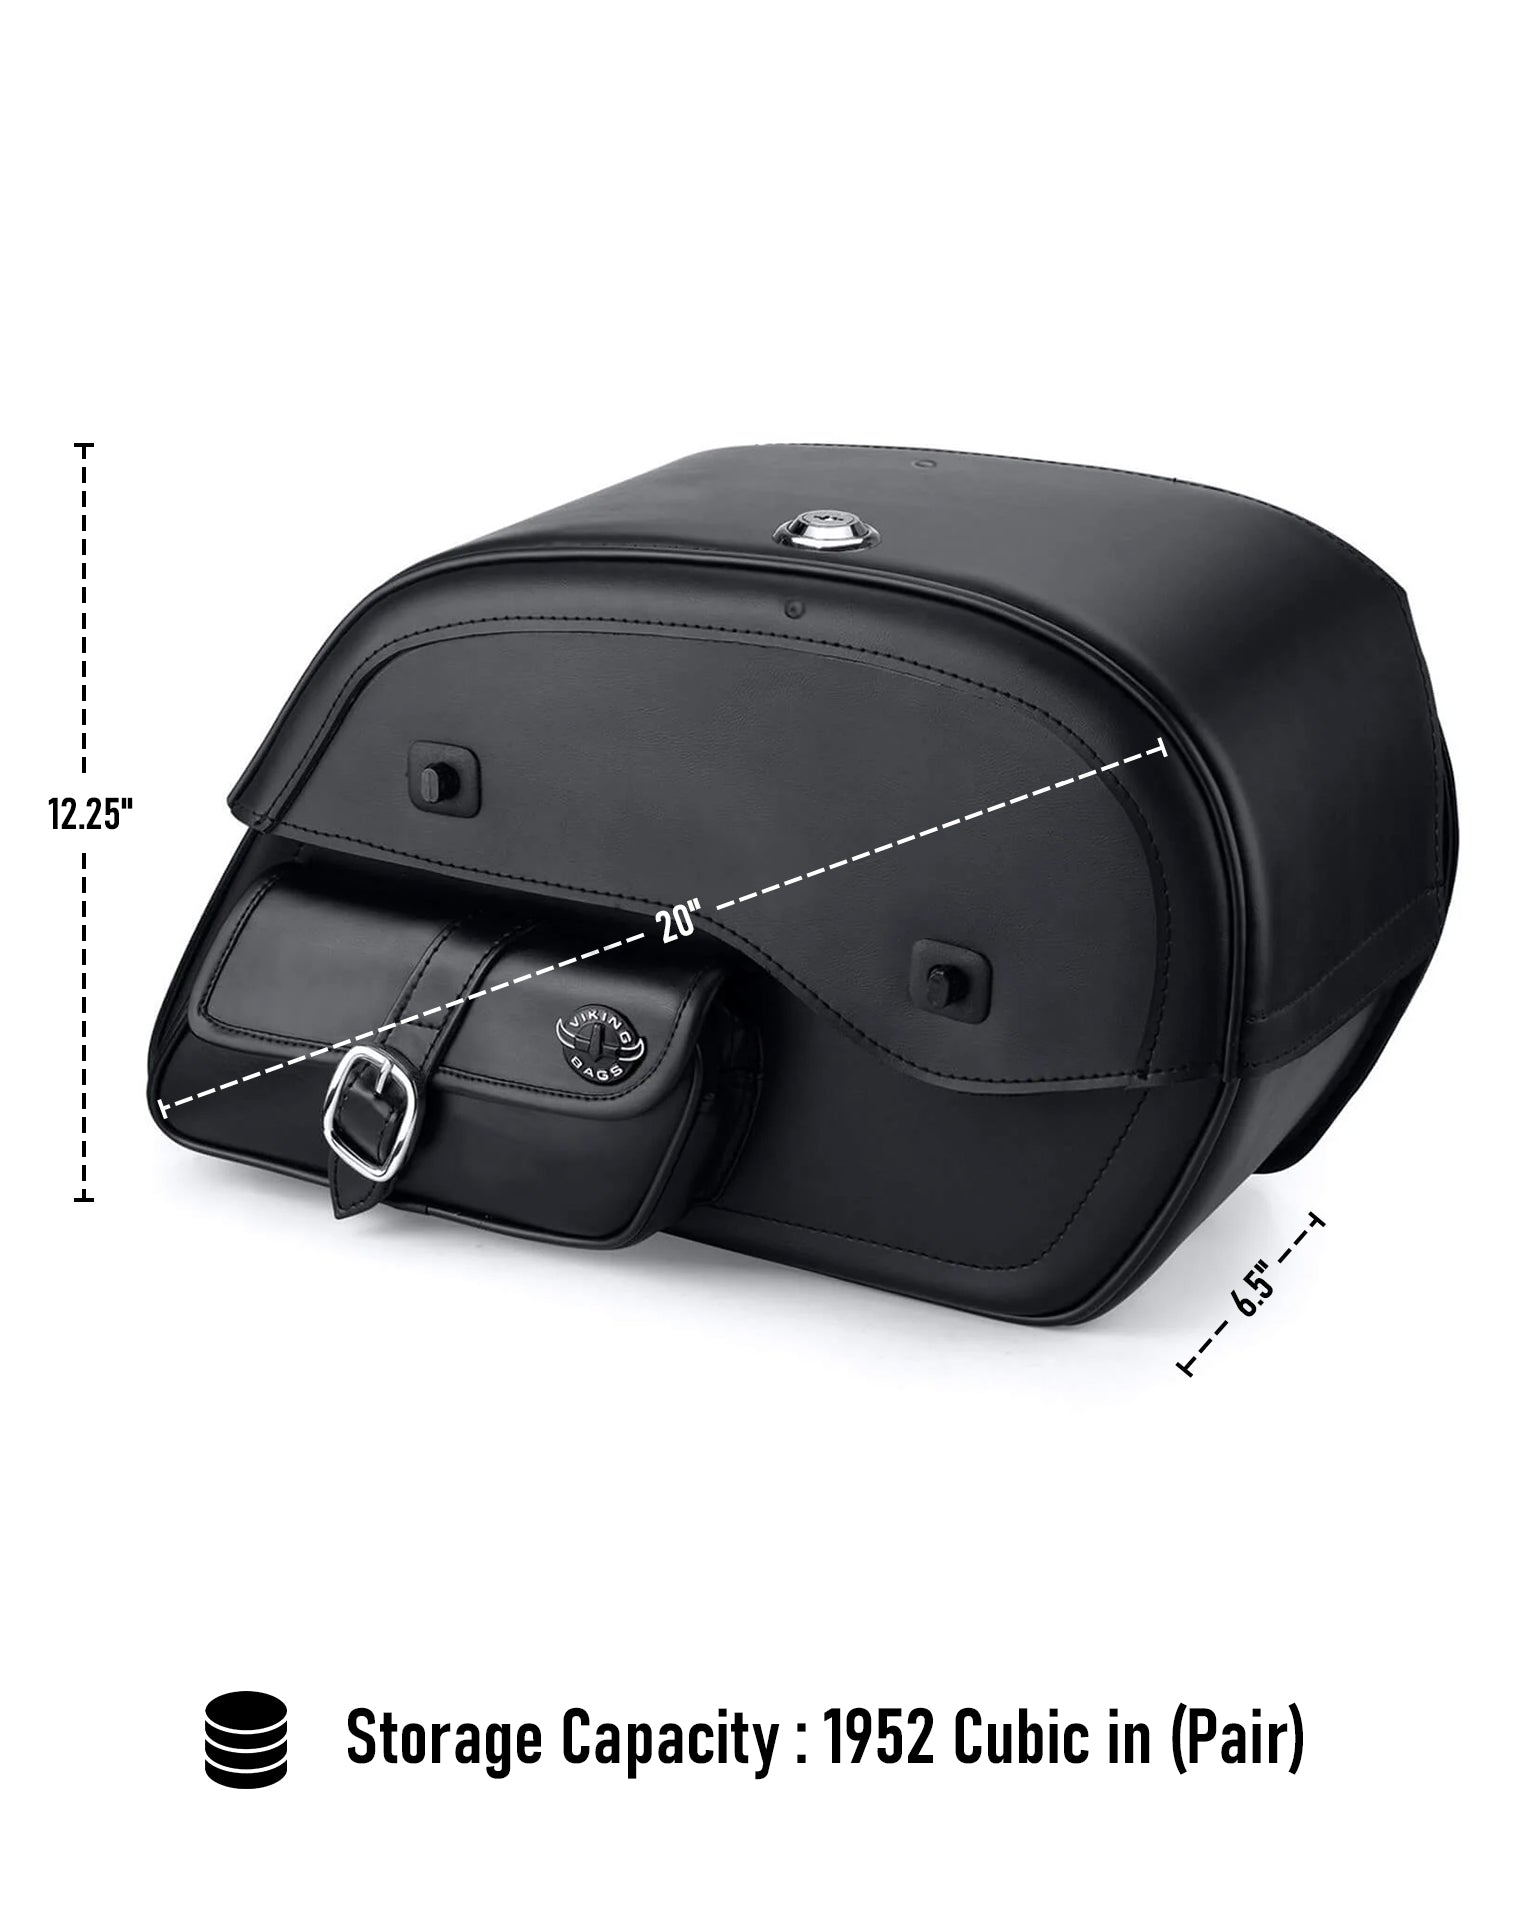 Viking Essential Side Pocket Large Leather Motorcycle Saddlebags For Harley Softail Custom Fxstc Can Store Your Ridings Gears